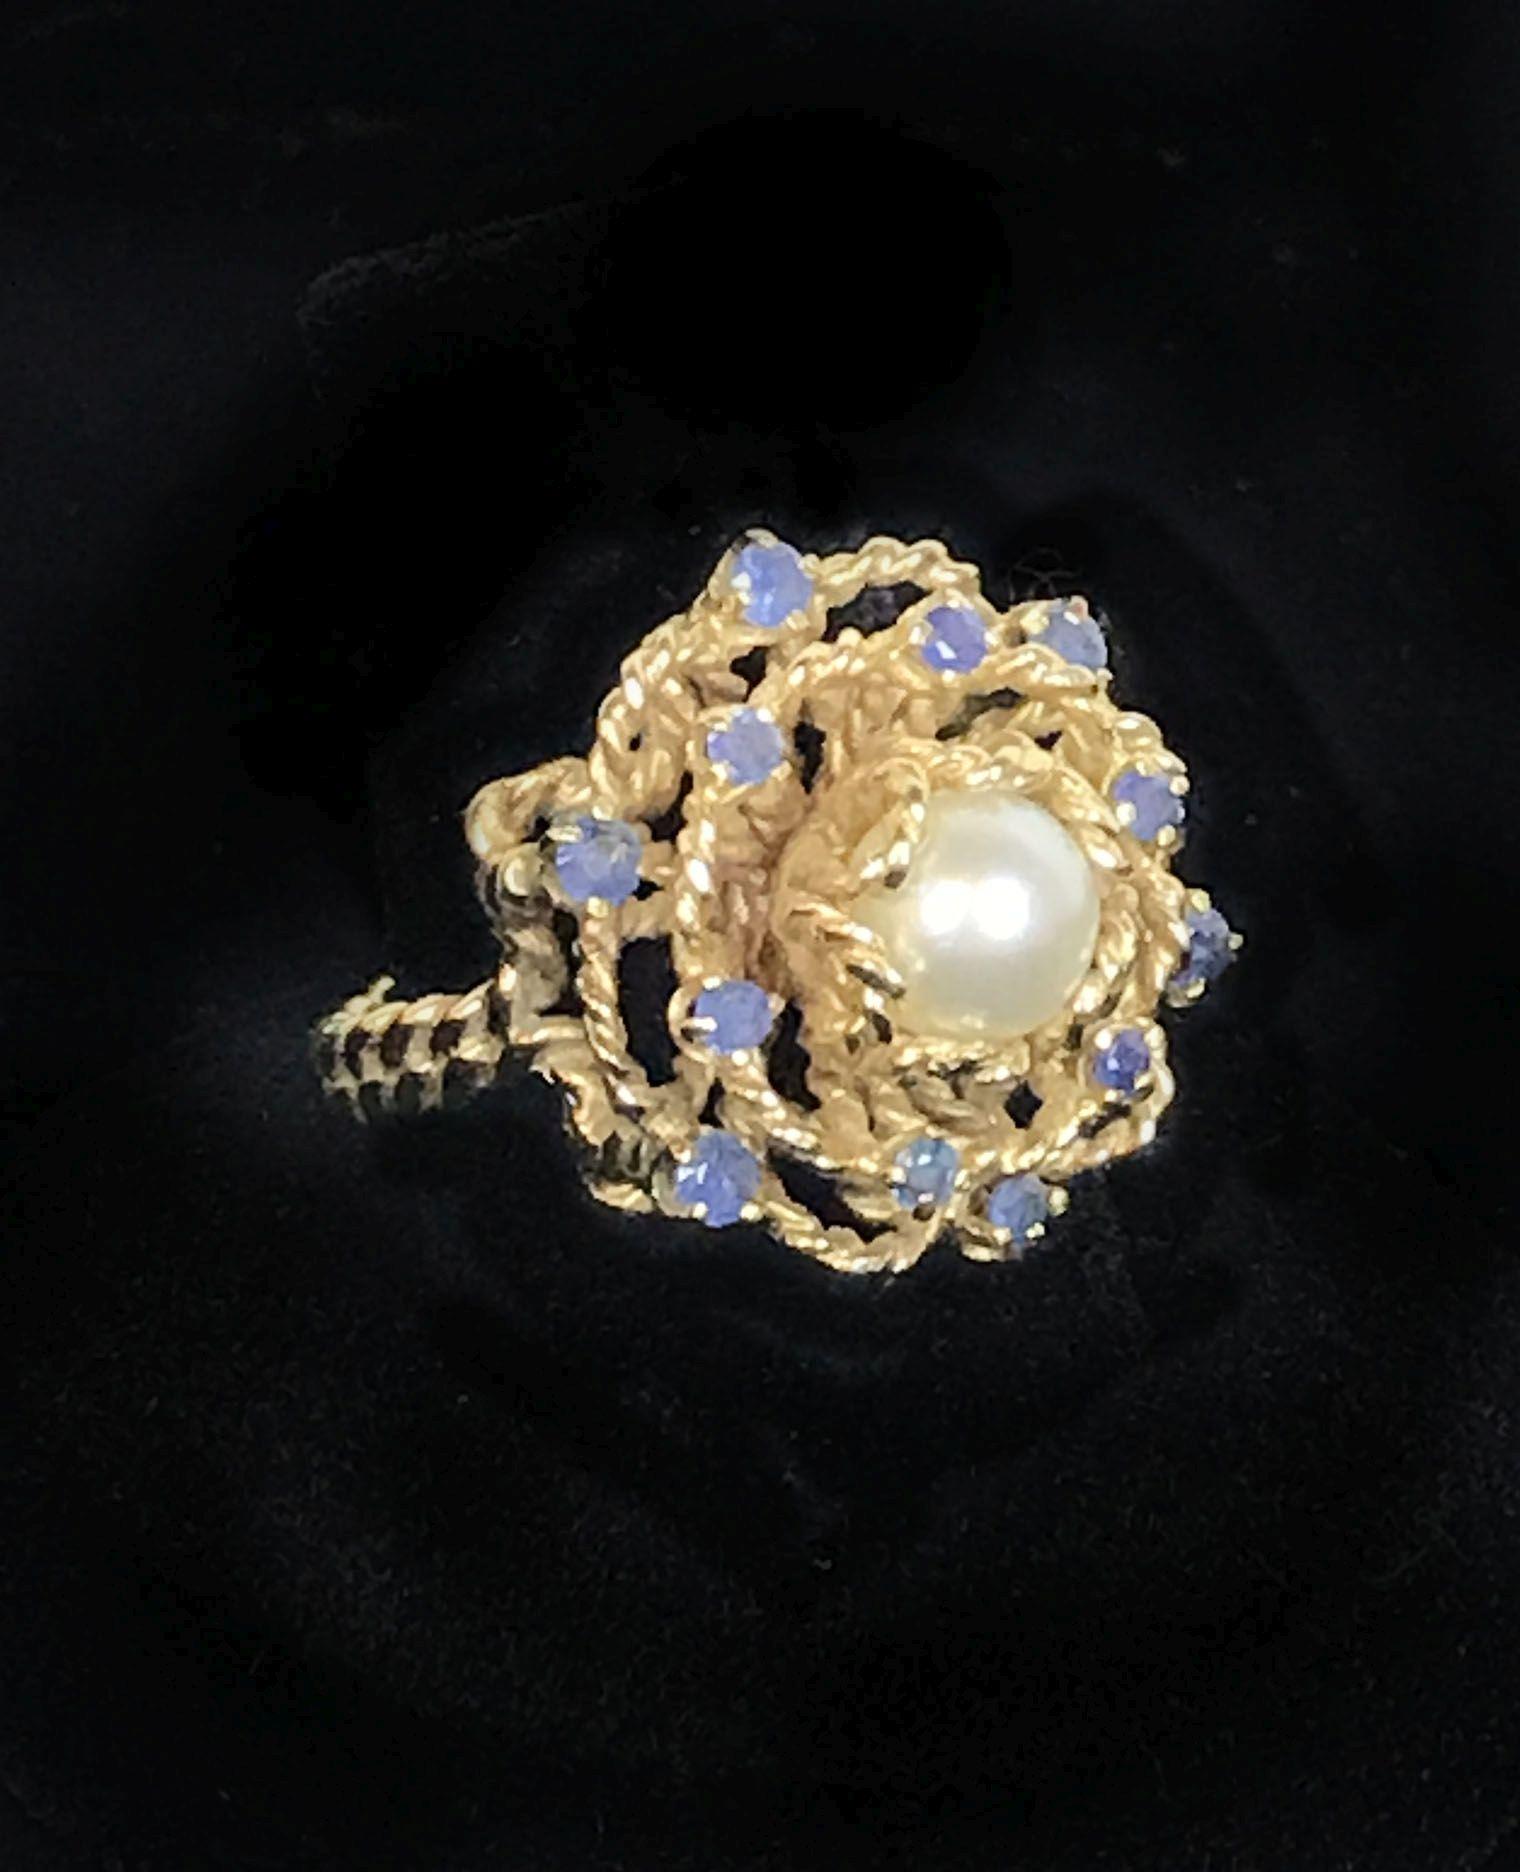 14KT Yellow Gold Pearl/Sapphire Ring and Aqua Marine Colored Earrings